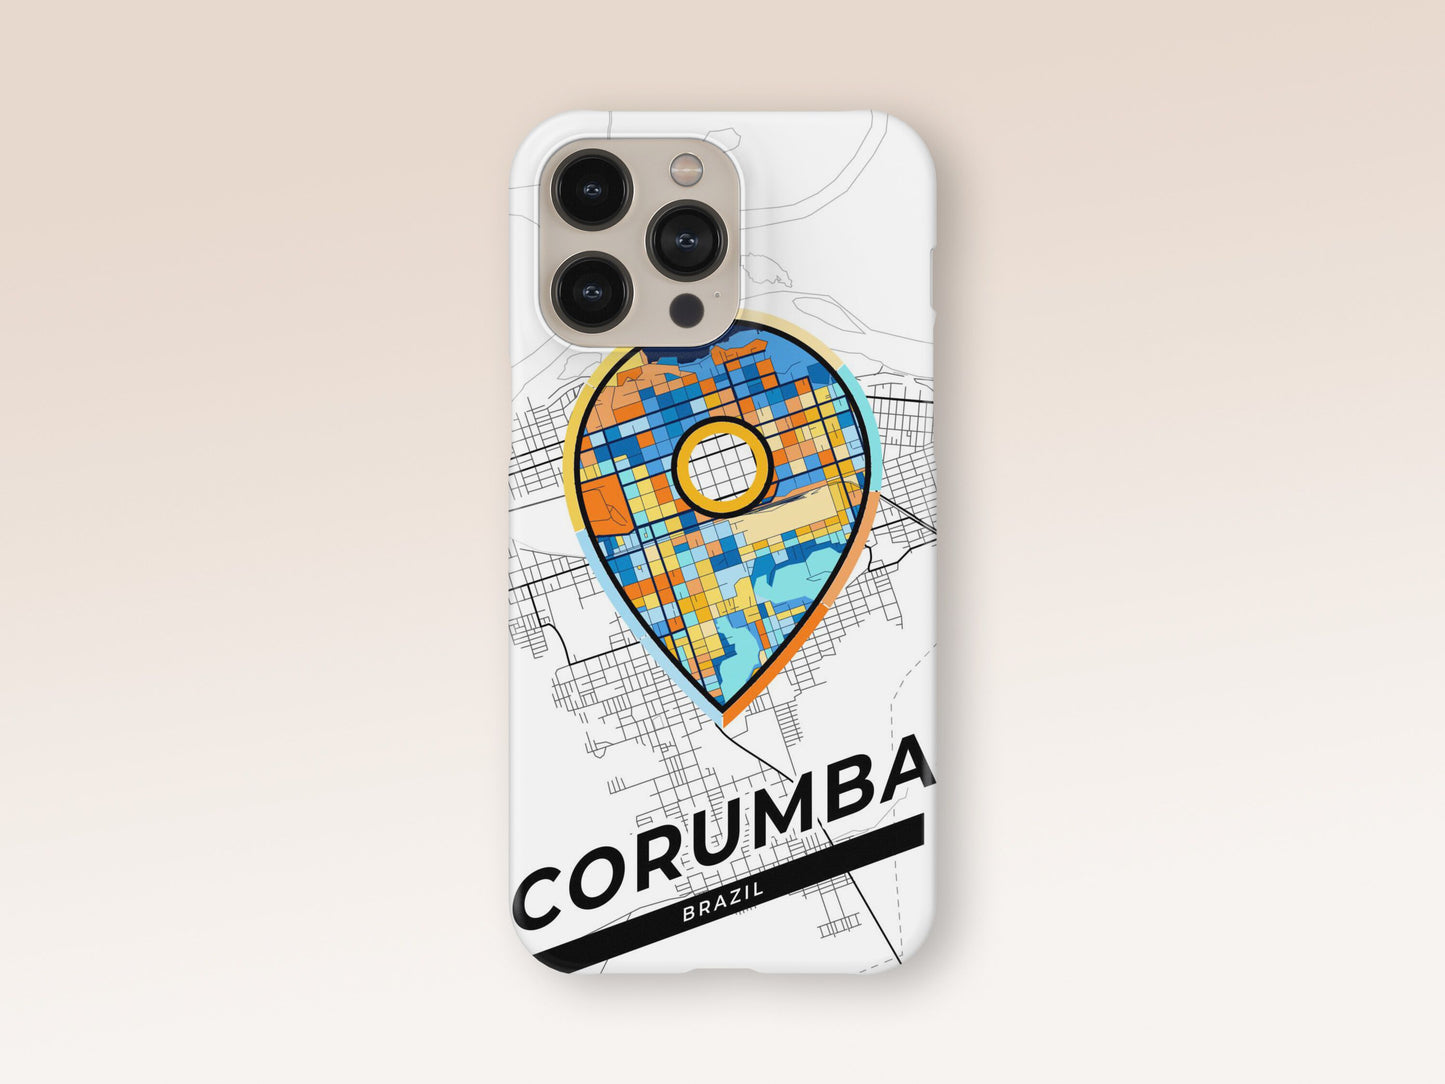 Corumba Brazil slim phone case with colorful icon. Birthday, wedding or housewarming gift. Couple match cases. 1